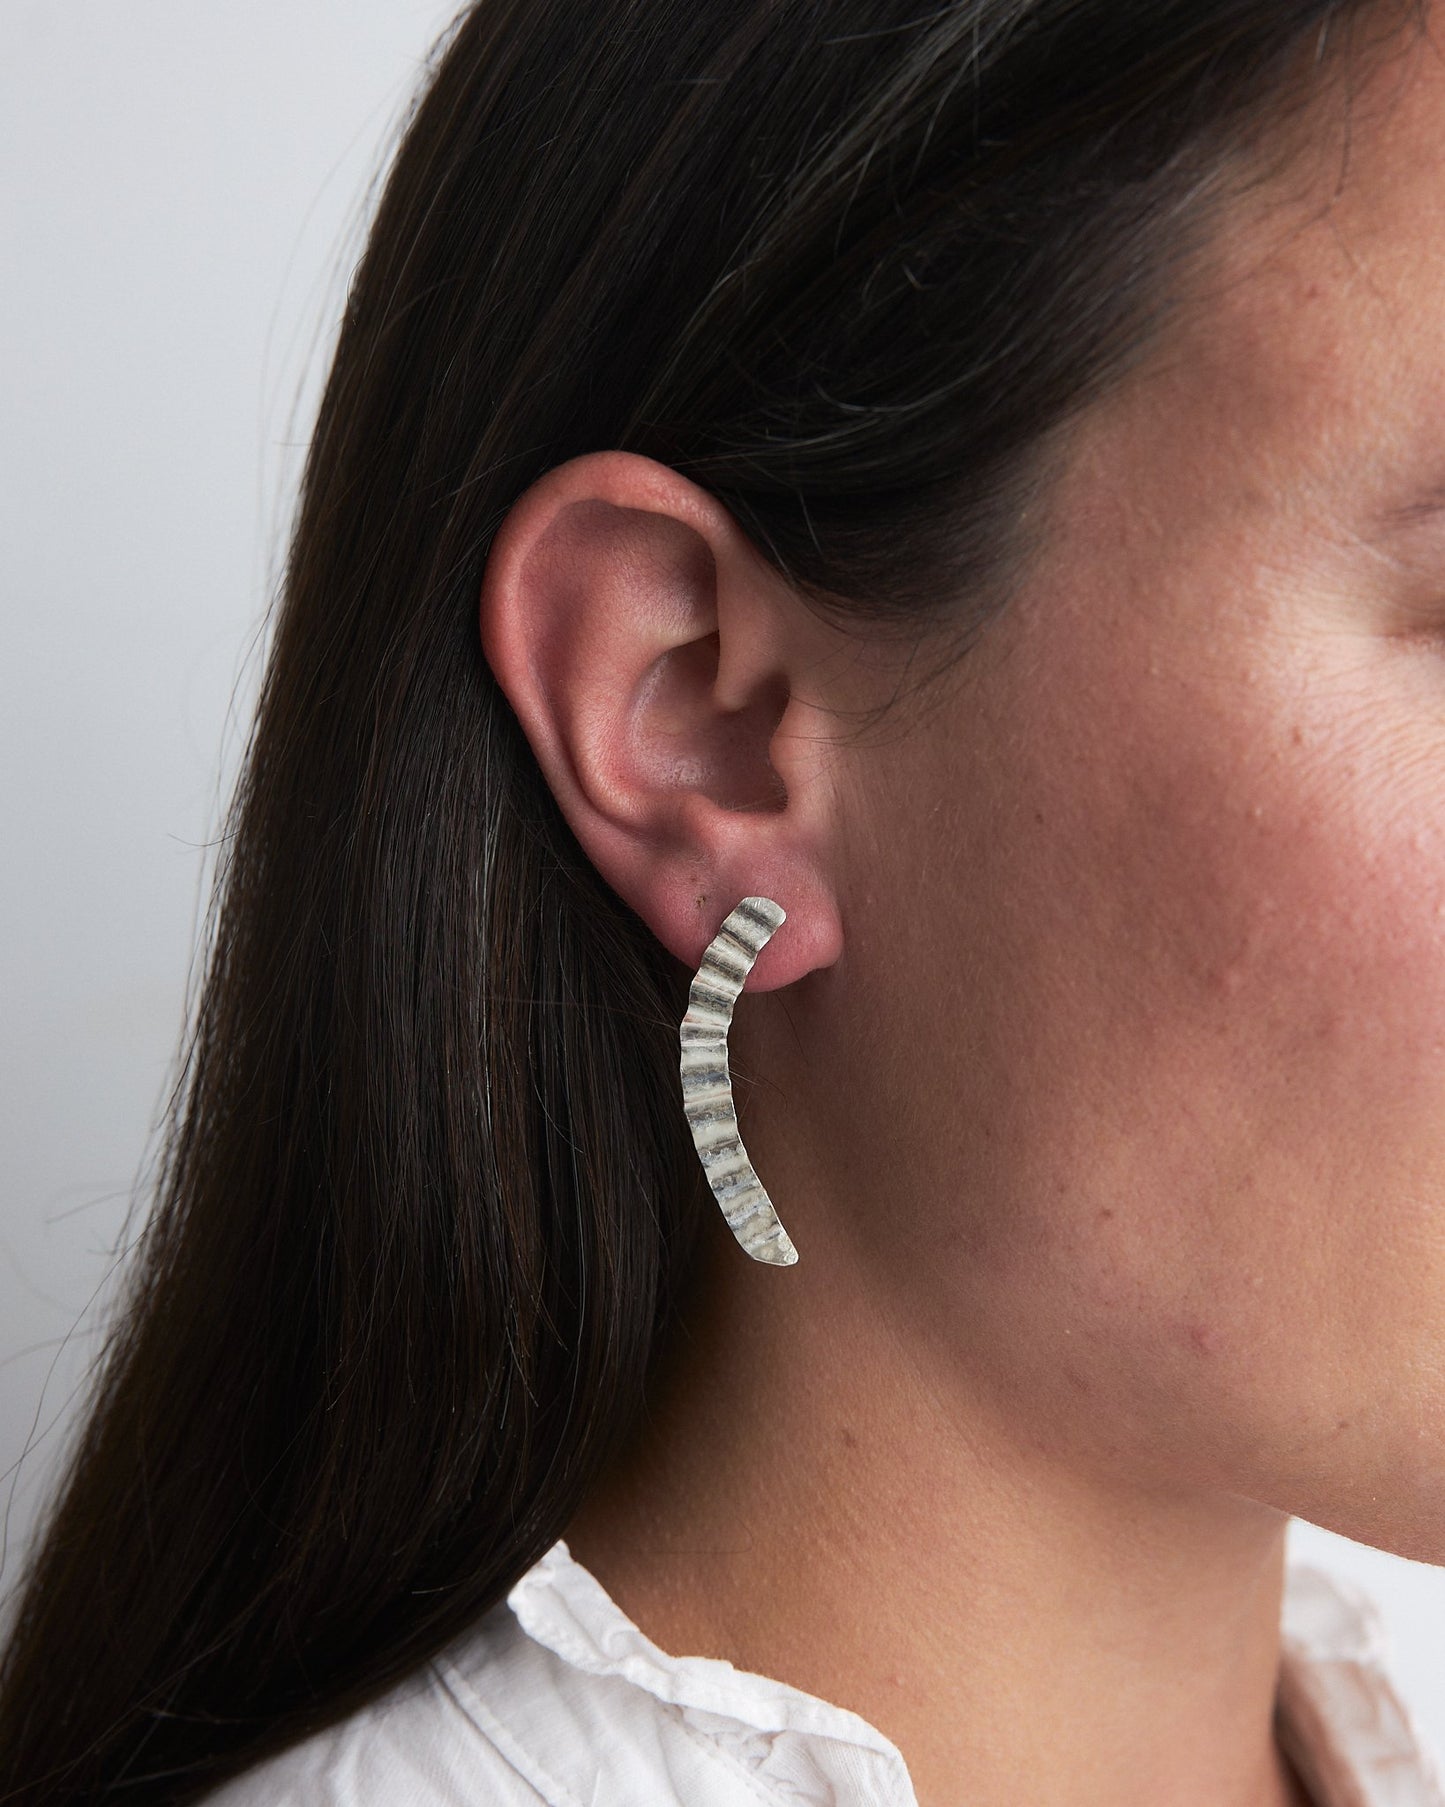 Handmade recycled silver earrings reminiscent of the rippling surface of a breeze across water, these studs have both rippling forms and curving shapes.